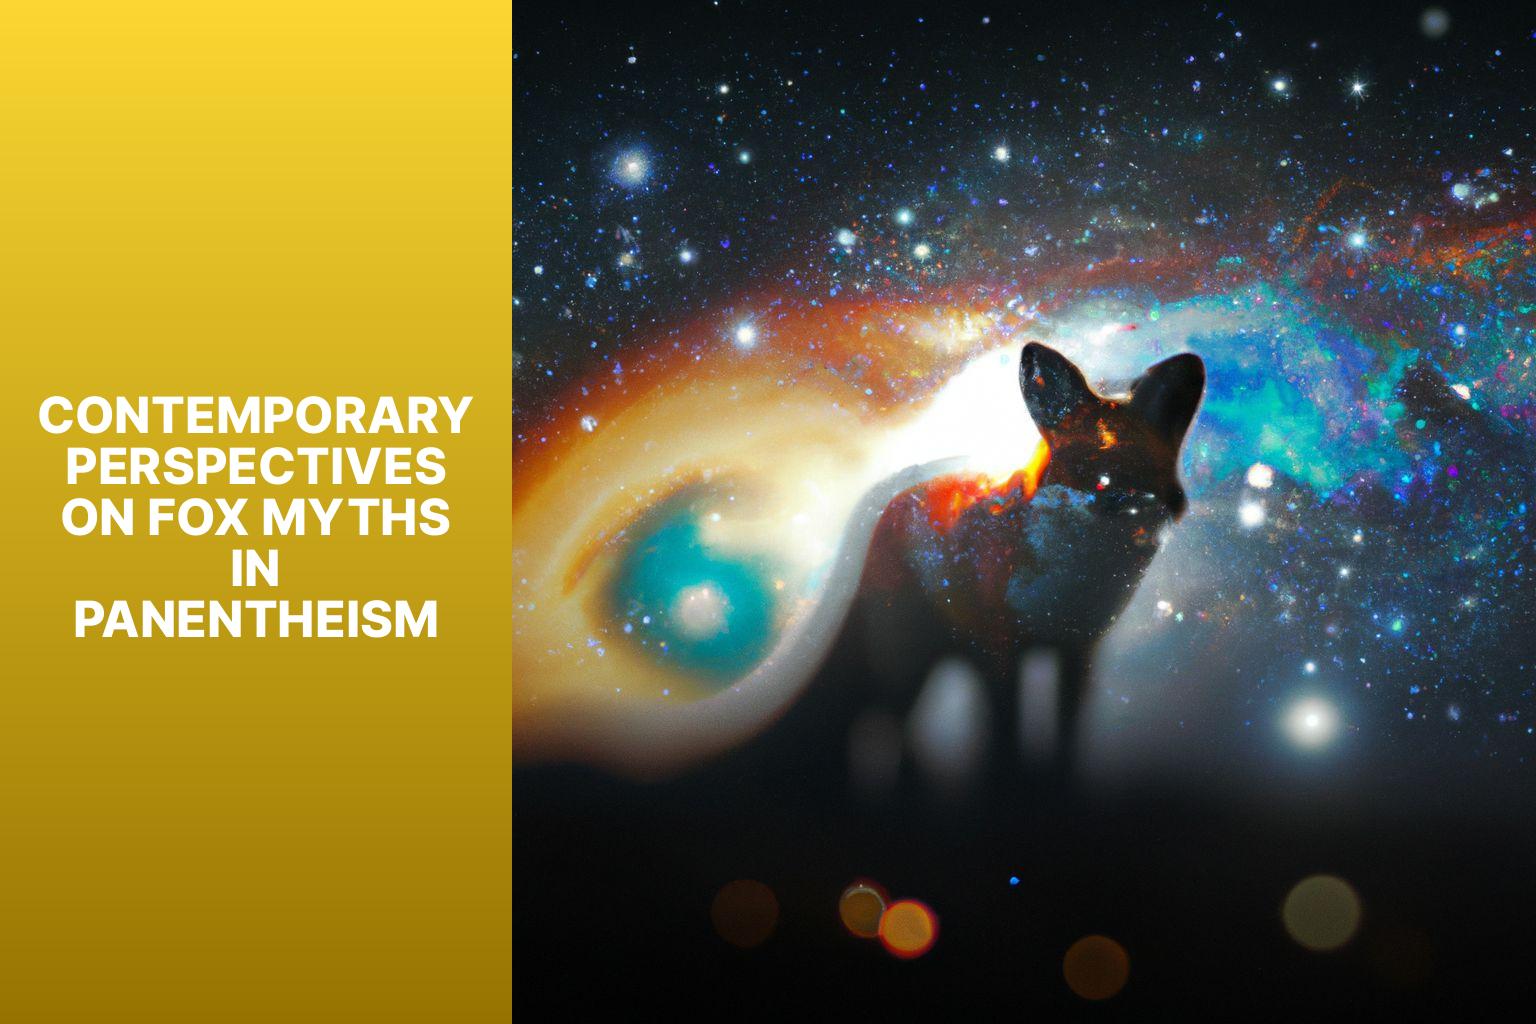 Contemporary Perspectives on Fox Myths in Panentheism - Fox Myths in Panentheism 